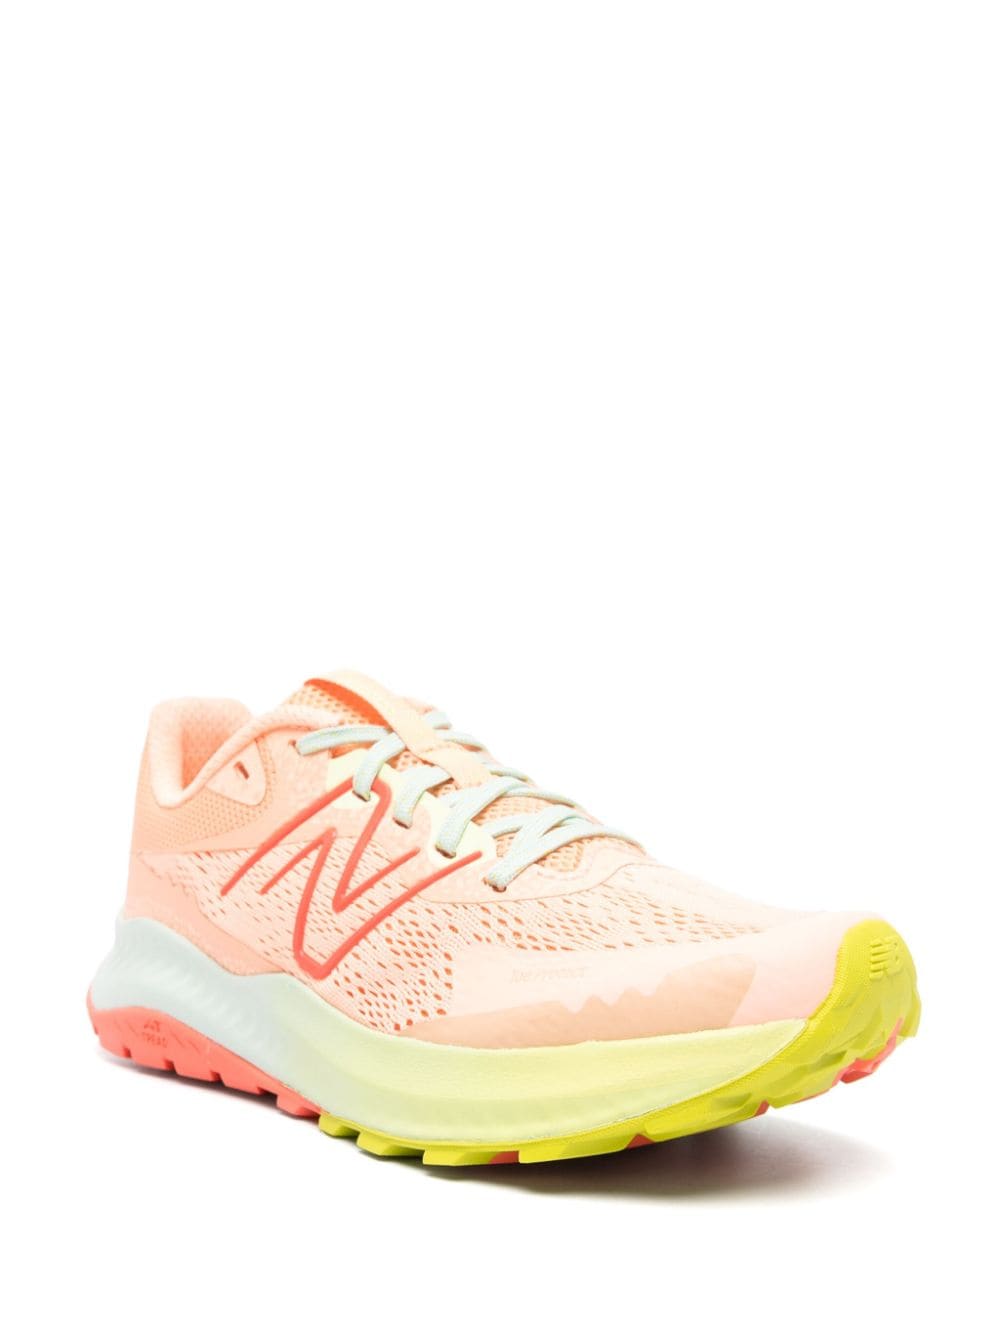 Nitrel lace-up sneakers<BR/><BR/>